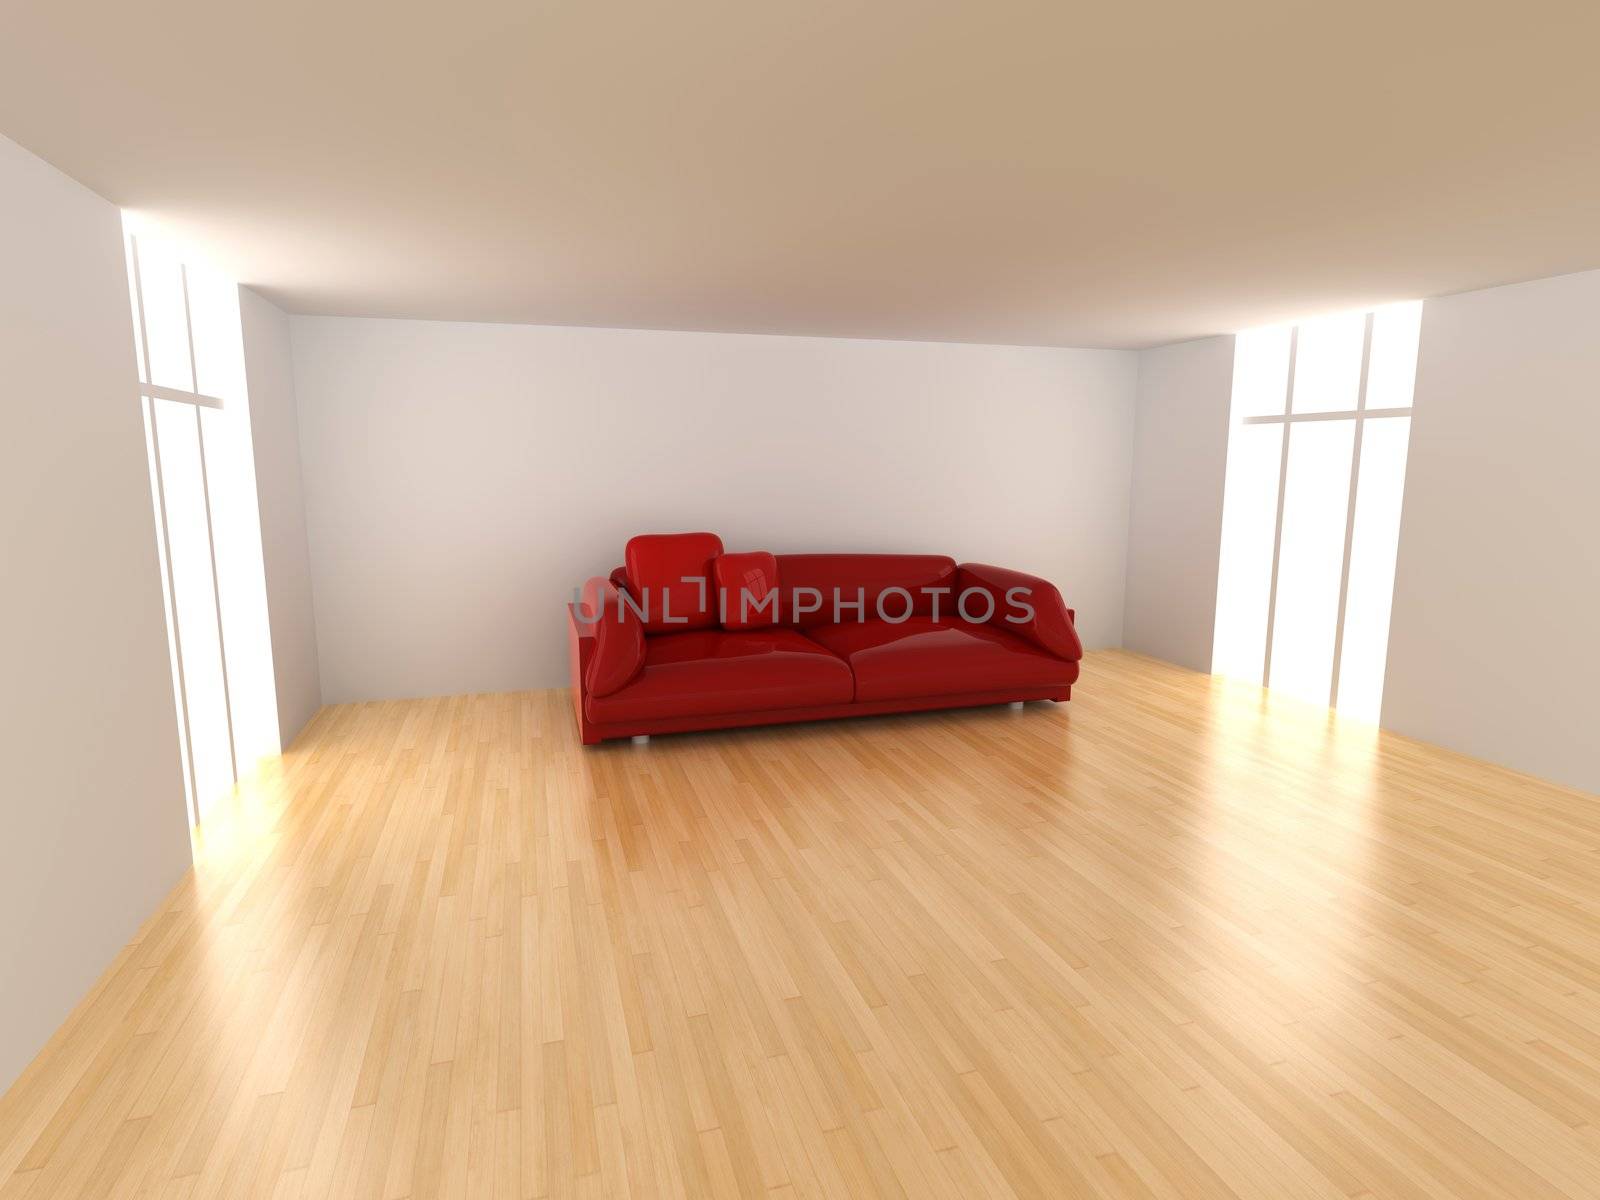 Red Sofa in an empty room by Spectral